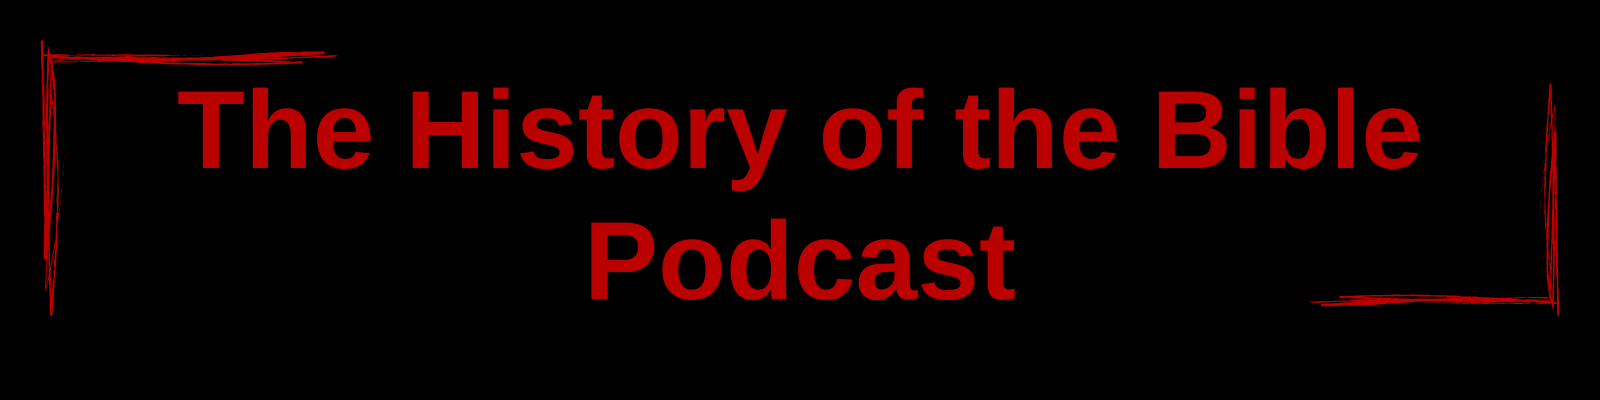 The History of the Bible Podcast